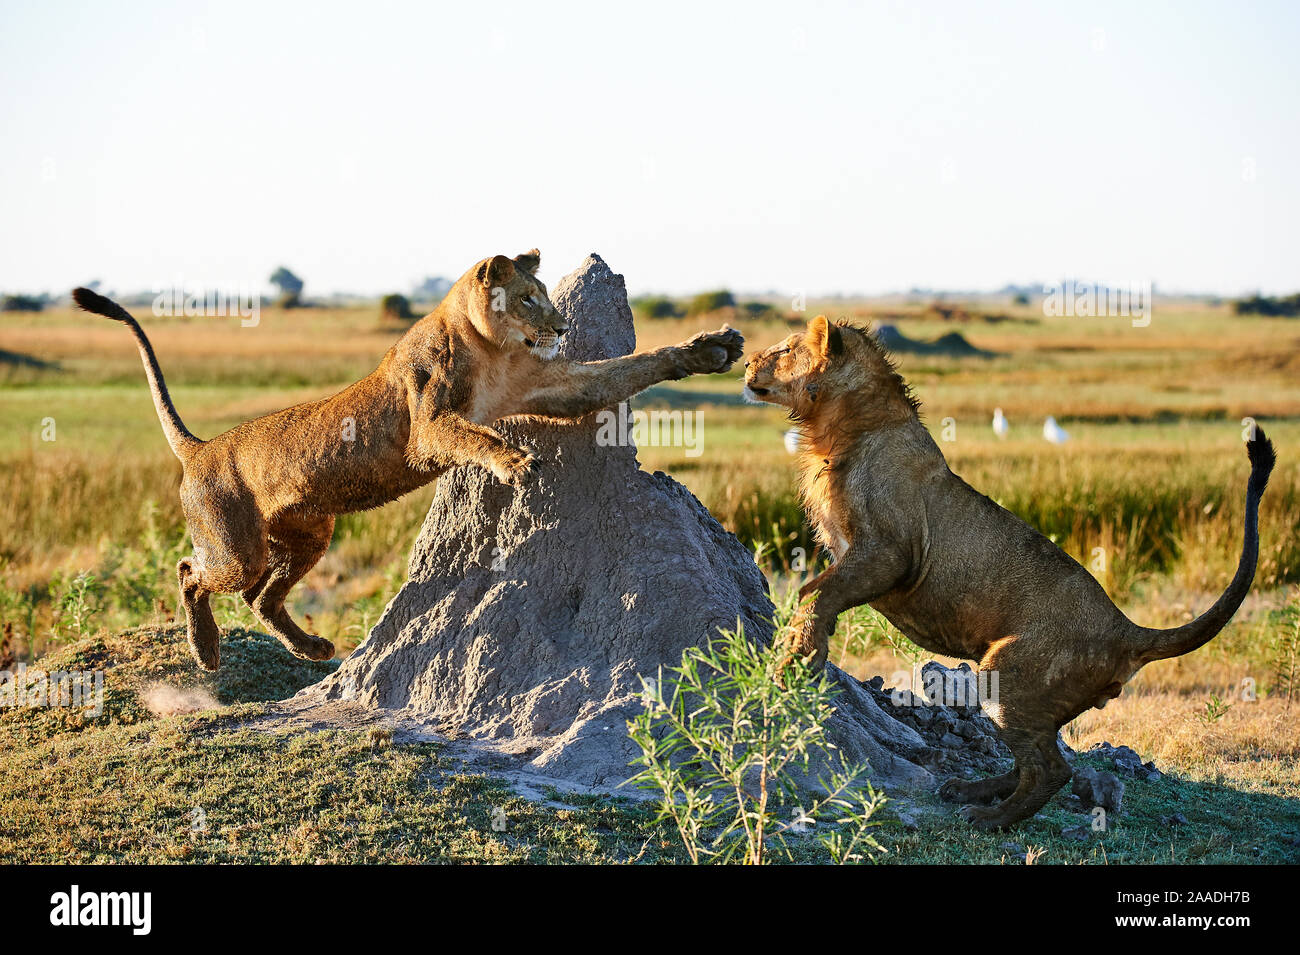 Afrian lioness (Panthera leo) playing with her juvenile cub aged 2 years in Duba Plains concession. Okavango delta, Botswana Stock Photo